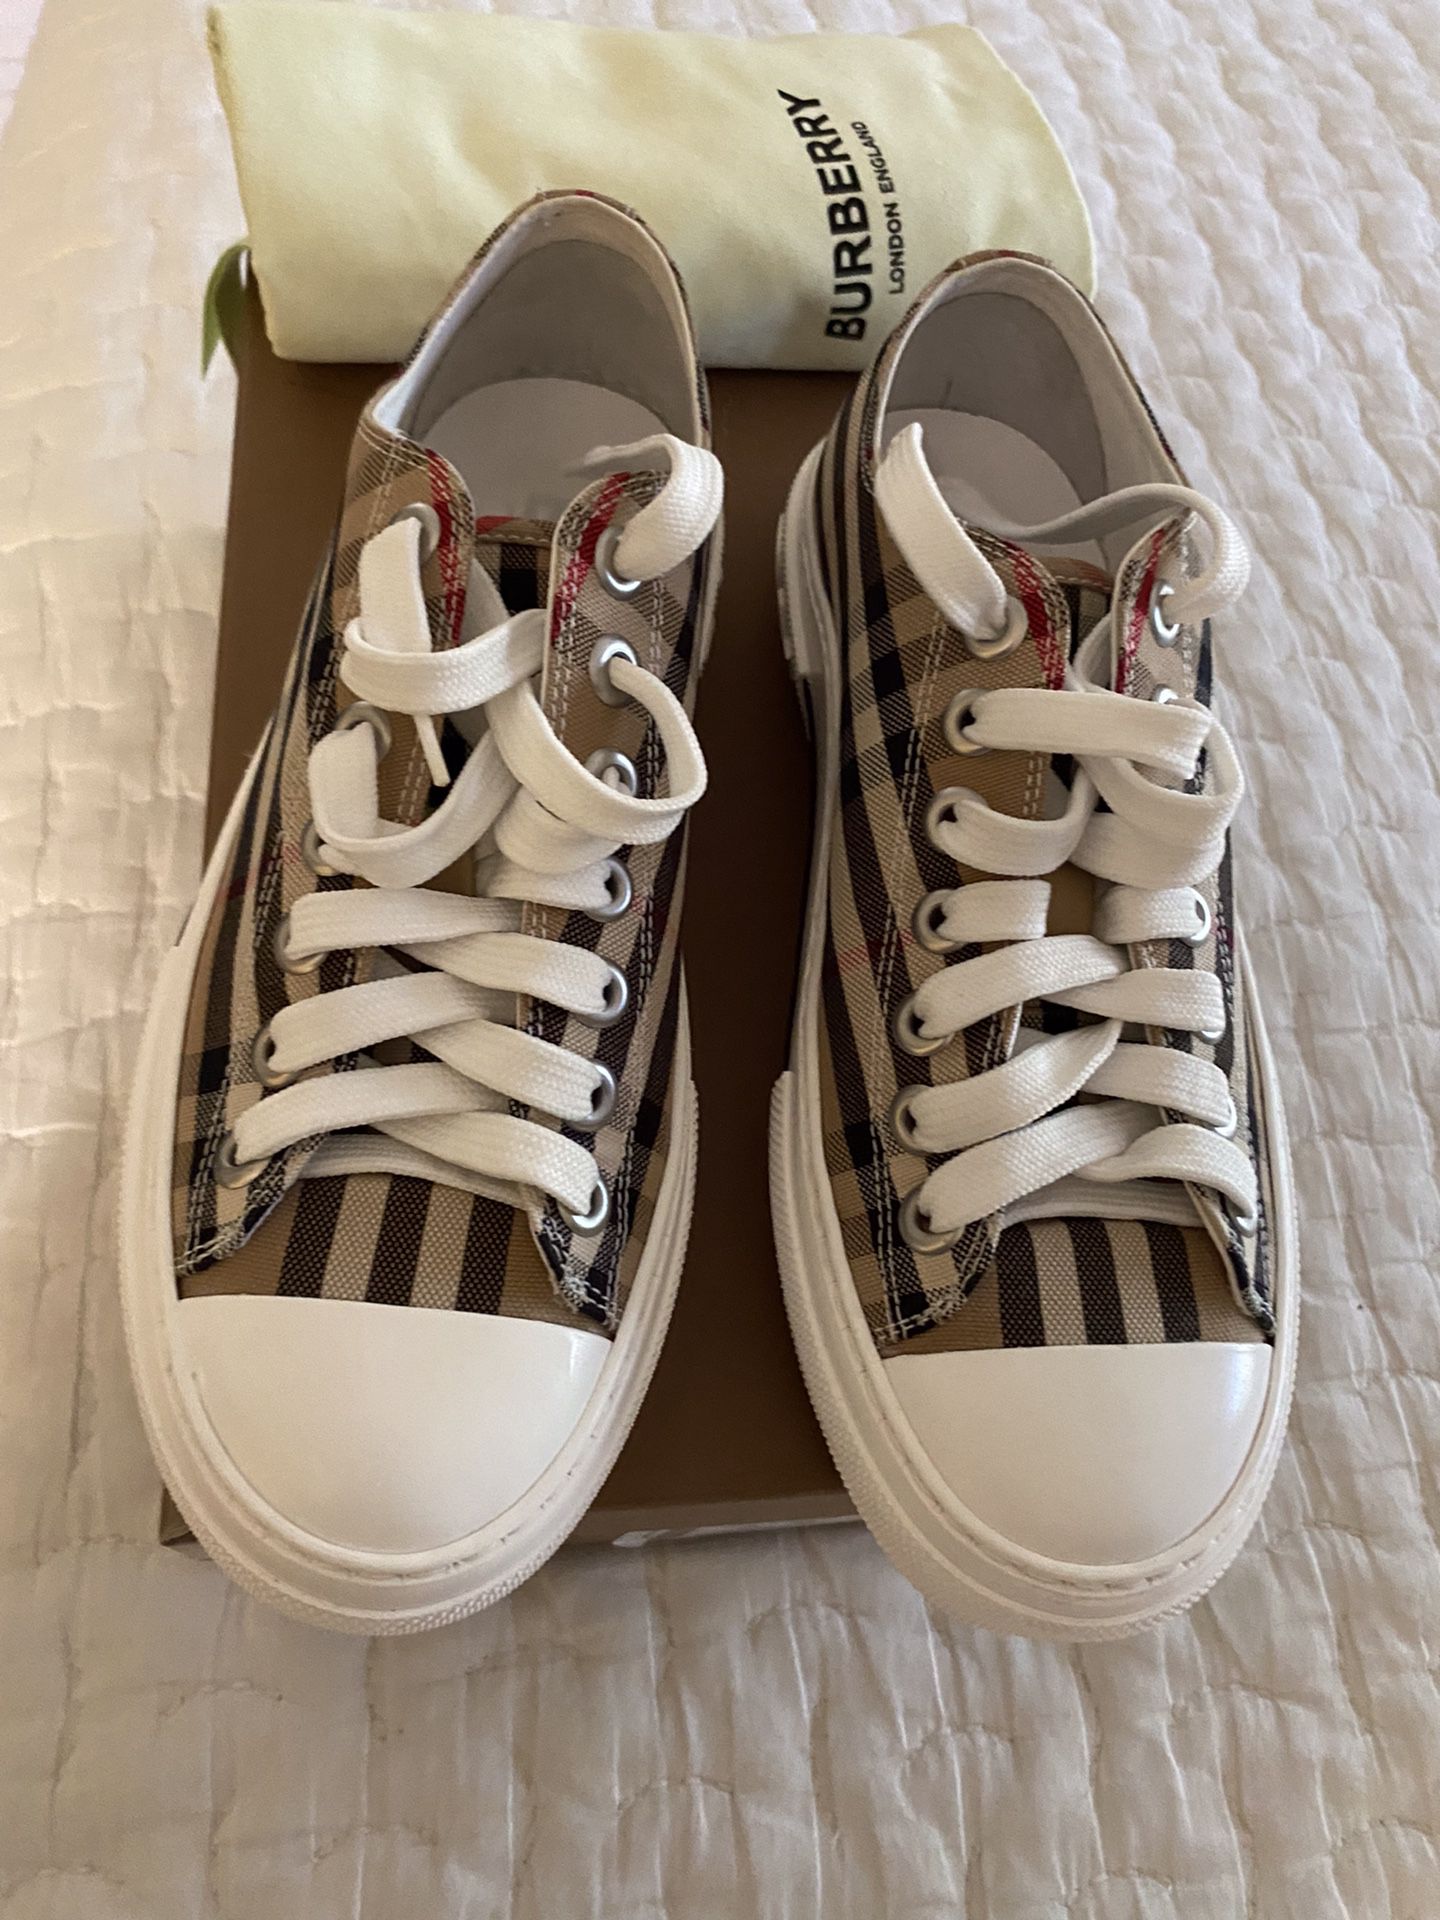 Burberry Shoes Size 39